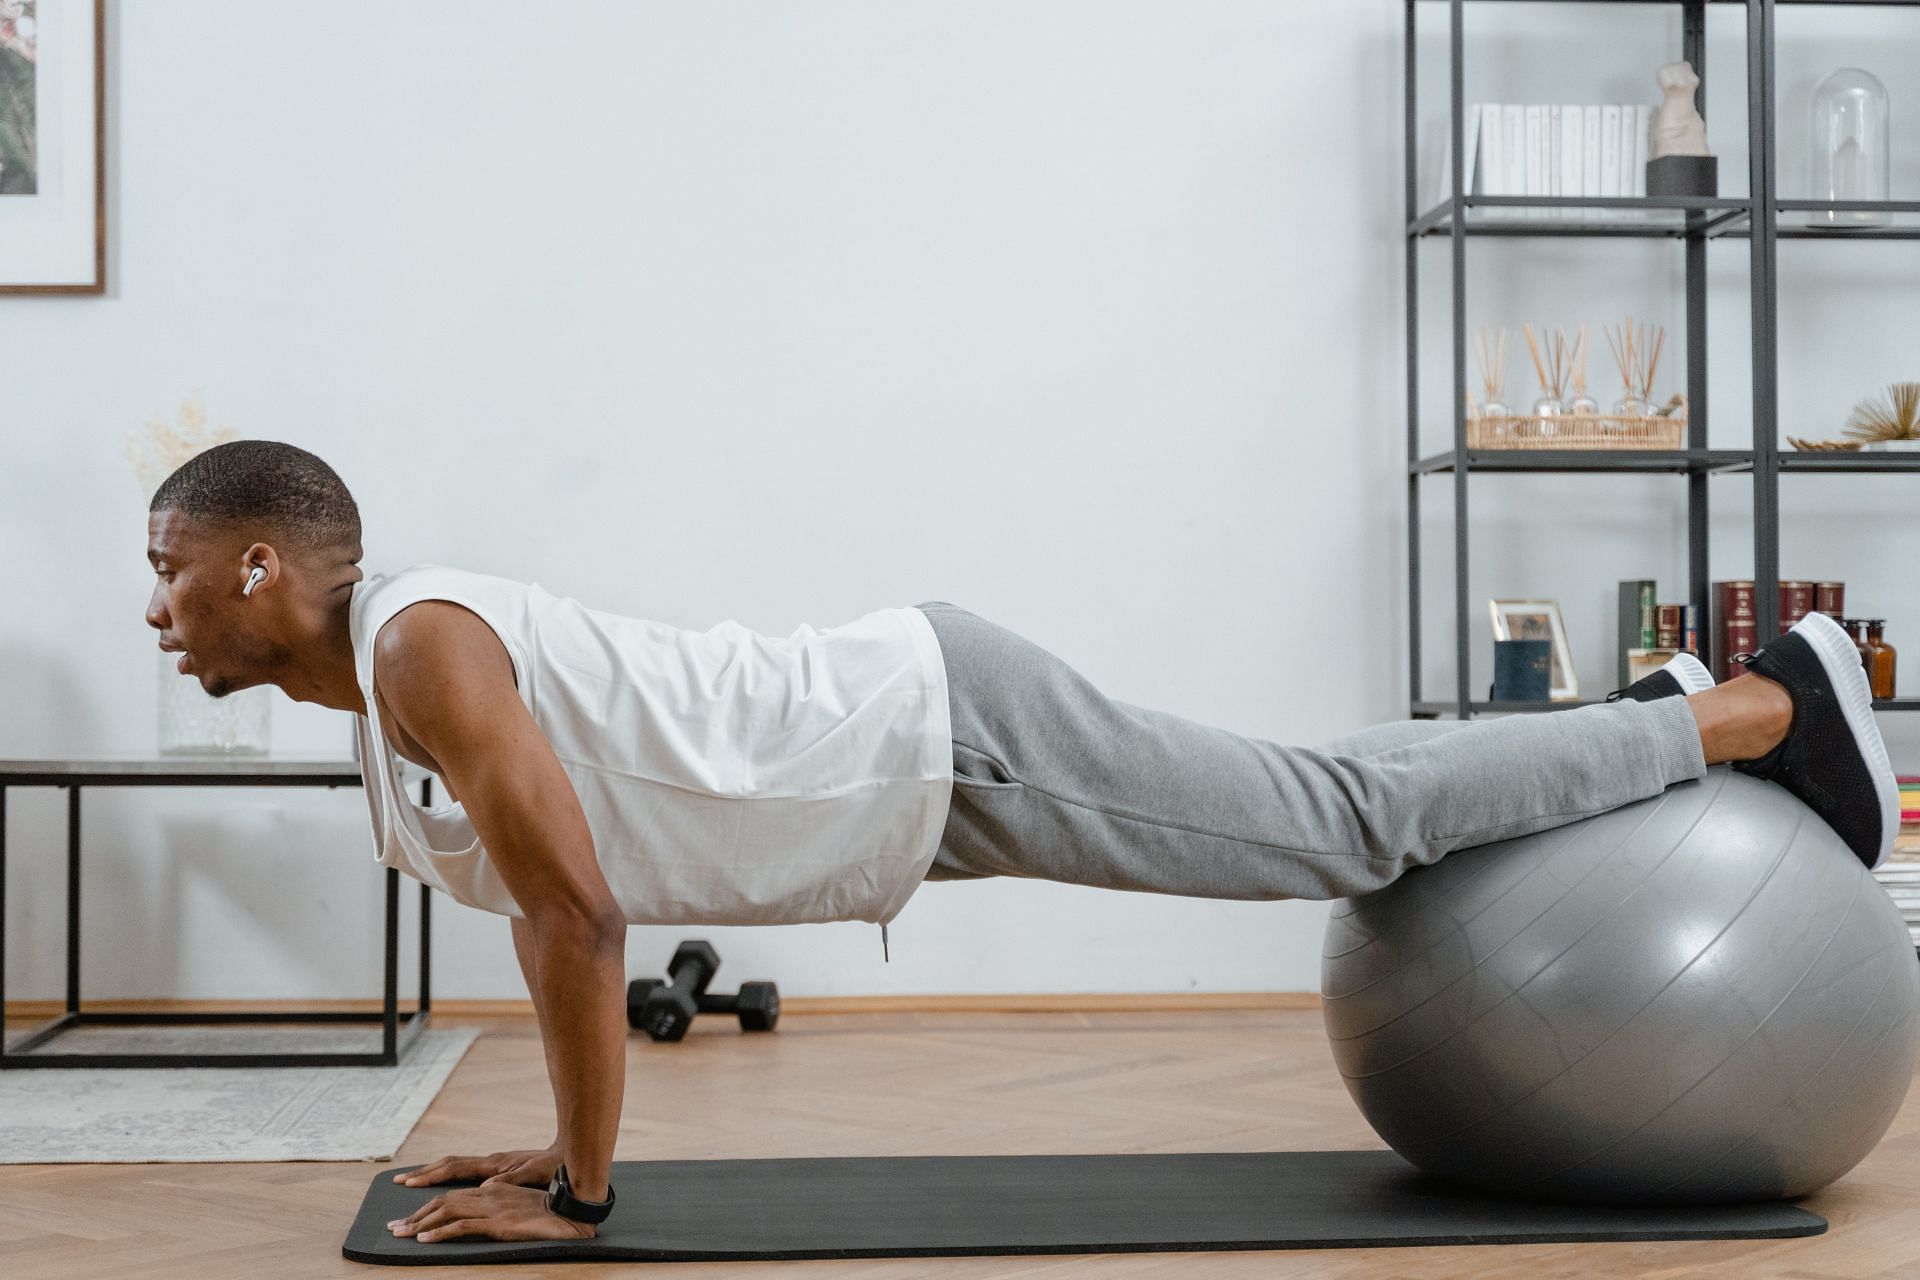 Stability ball exercises can be an interesting addition to your routine. (Image via Pexels @Mart Production)